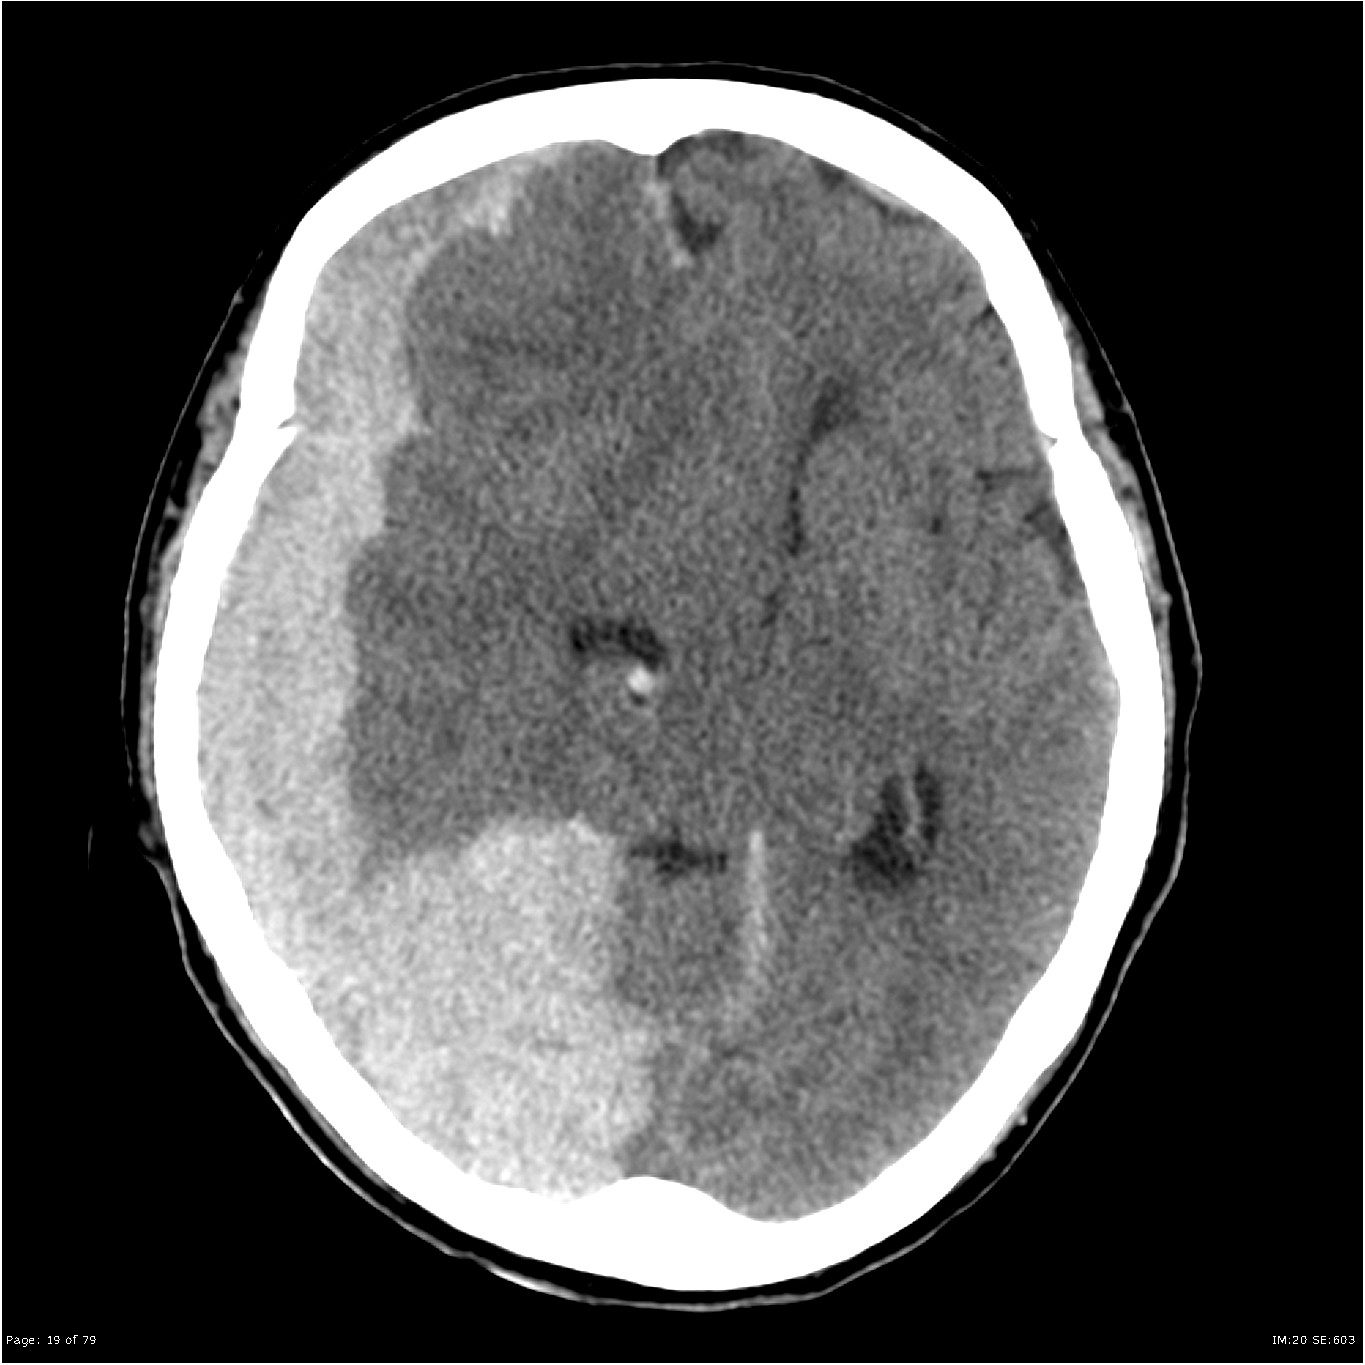 Large subdural hemorrhage in a patient who was on Warfarin (source)